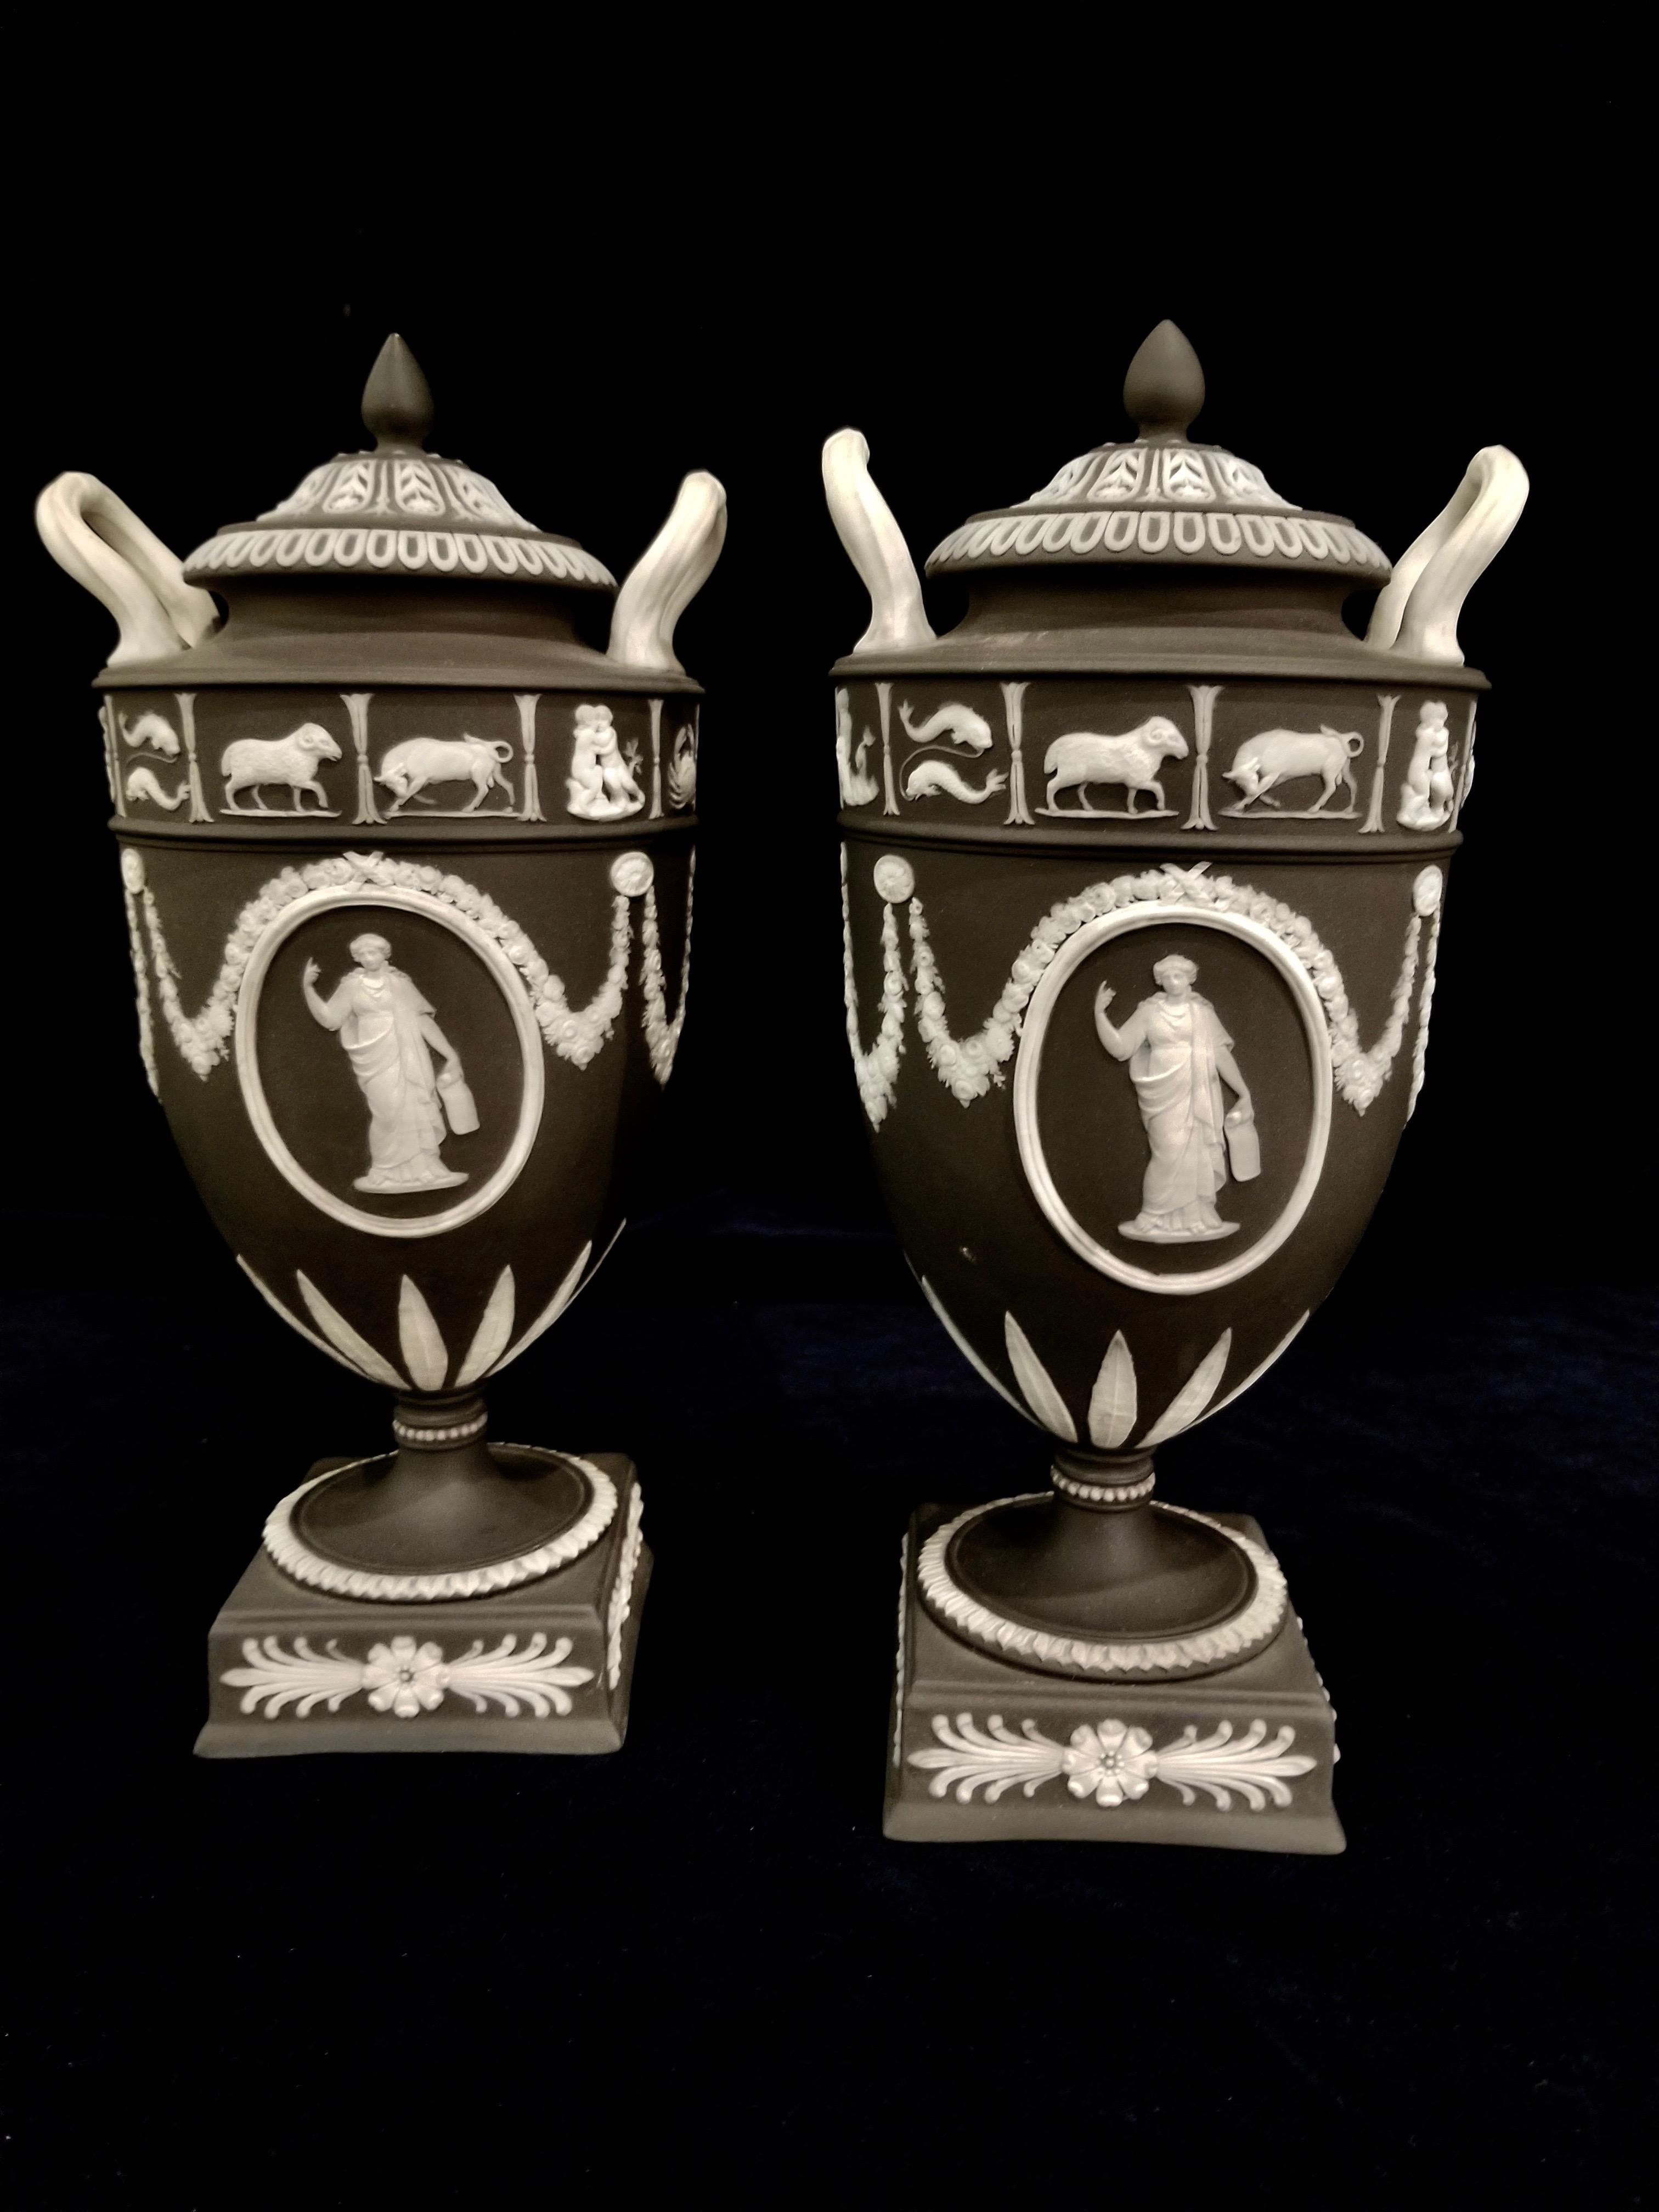 An exquisite pair of 19th century English, Staffordshire, Jasperware black ground Wedgwood vases with zodiac subjects. Each of the amphora form with original black basalt lids. The body of each is decorated with neoclassical subjects in white